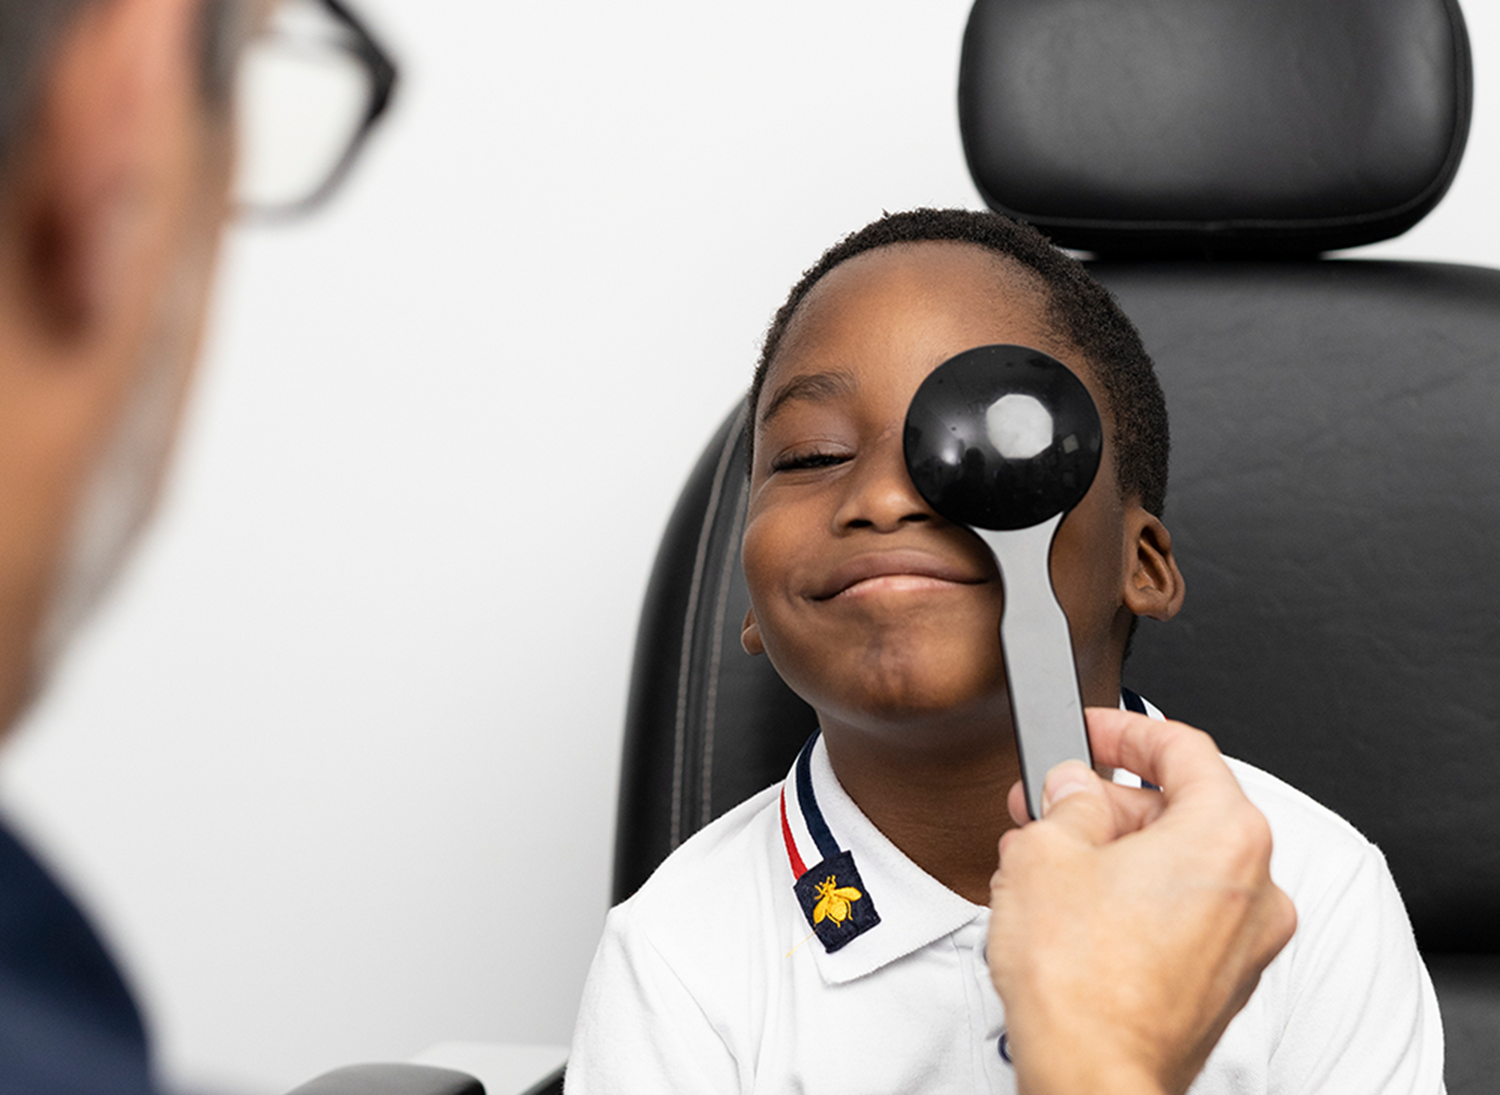 An Optometrist carrying out eye exam on a kid